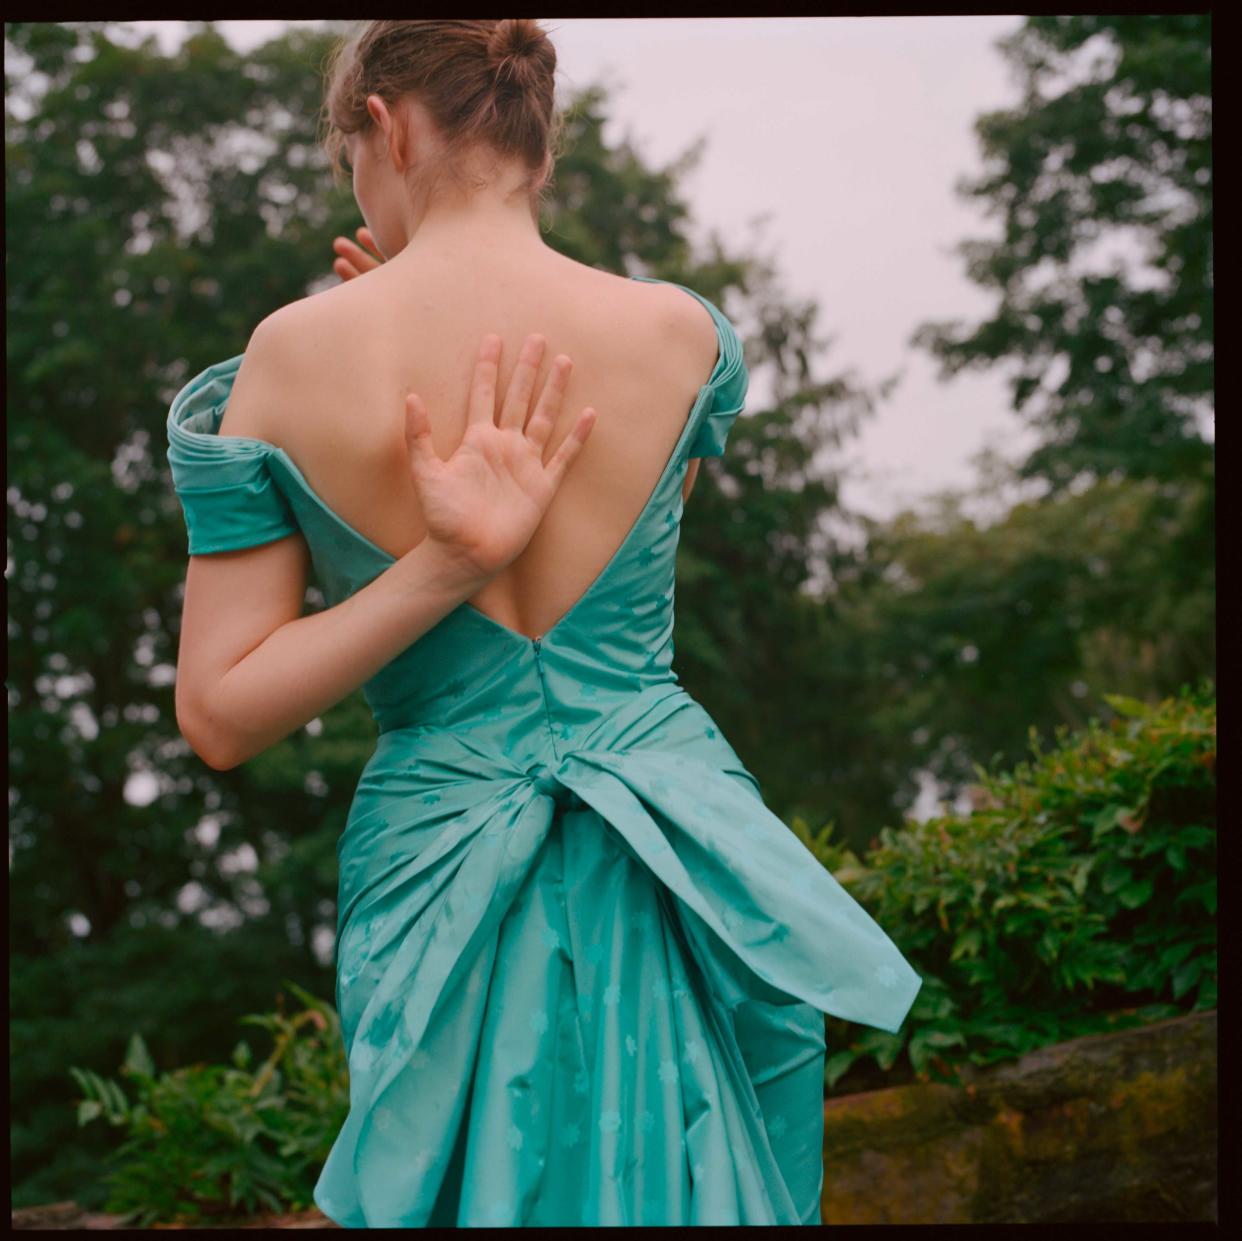 Maya Hawke wears an off-the-shoulder aqua, polka-dot gown from Zac Posen’s SS19 collection. (Photo: Courtesy of Zac Posen)